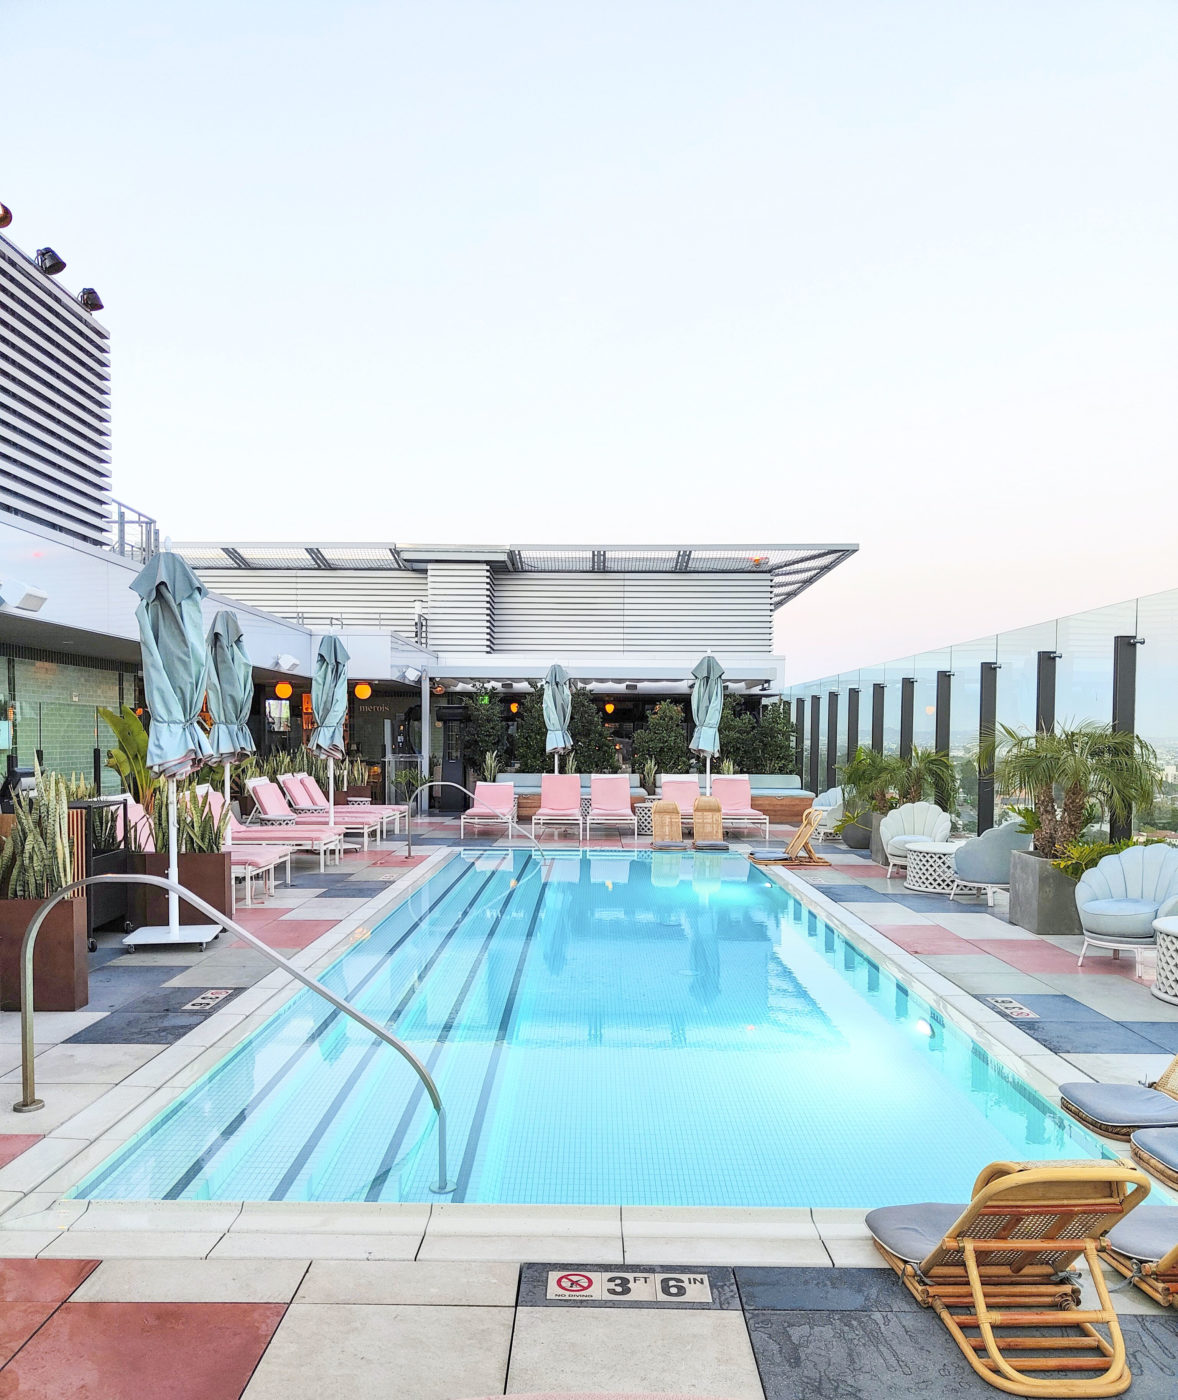 LA travel guide Pendry west hollywood.